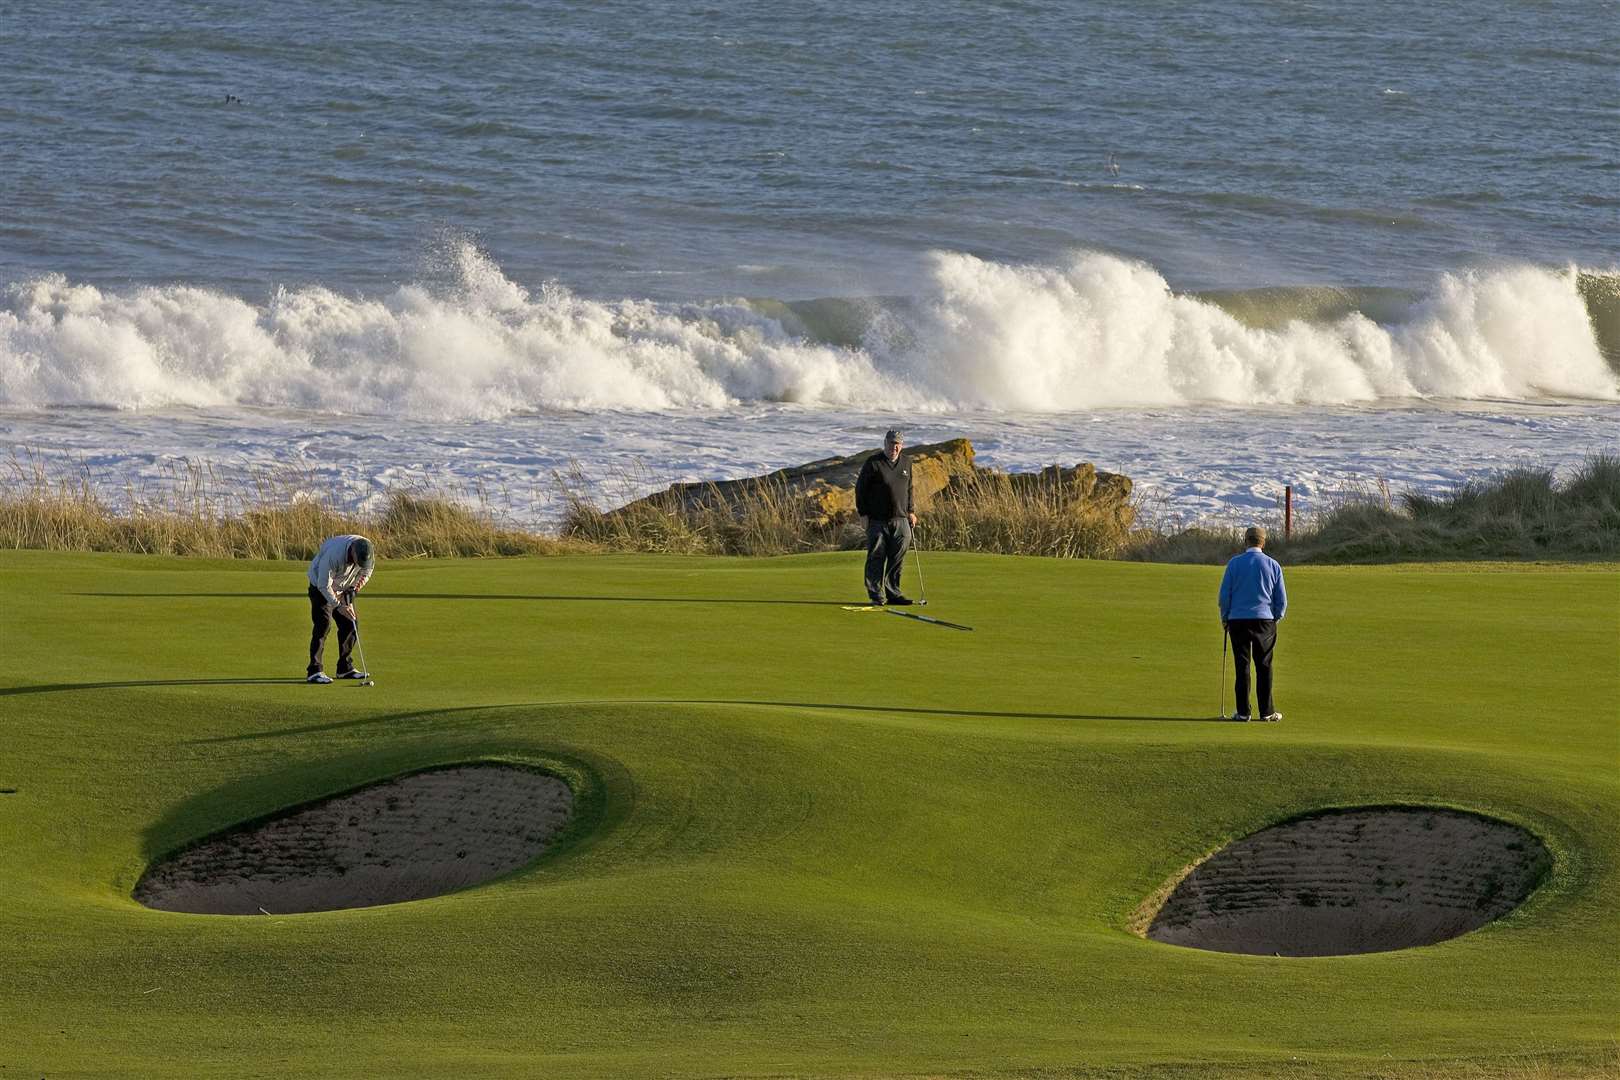 Royal Dornoch Golf Club has been named as the best golf course in Scotland.